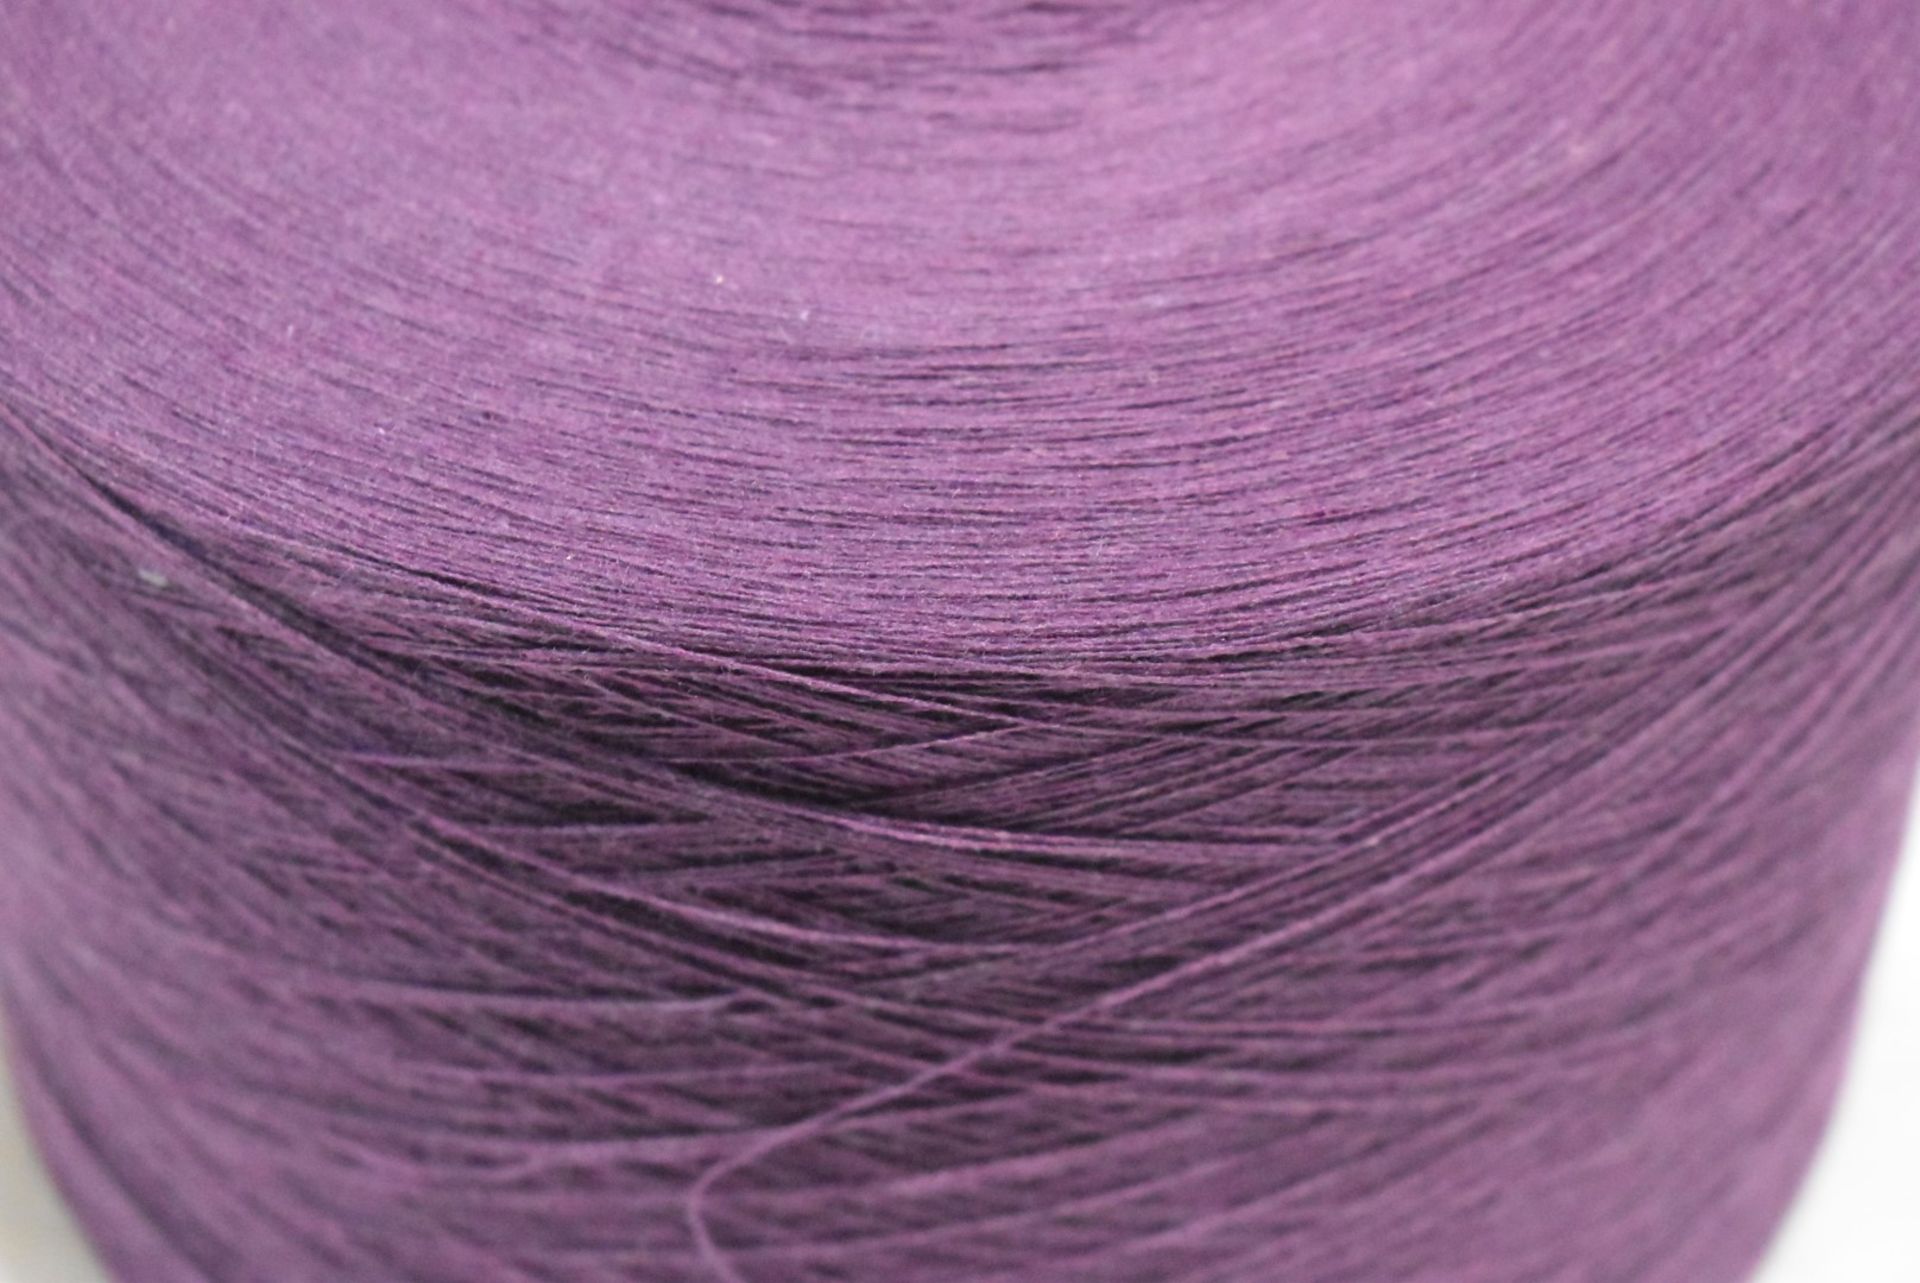 1 x Cone of 1/13 MicroCotton Knitting Yarn - Purple - Approx Weight: 2,300g - New Stock ABL Yarn - Image 3 of 9